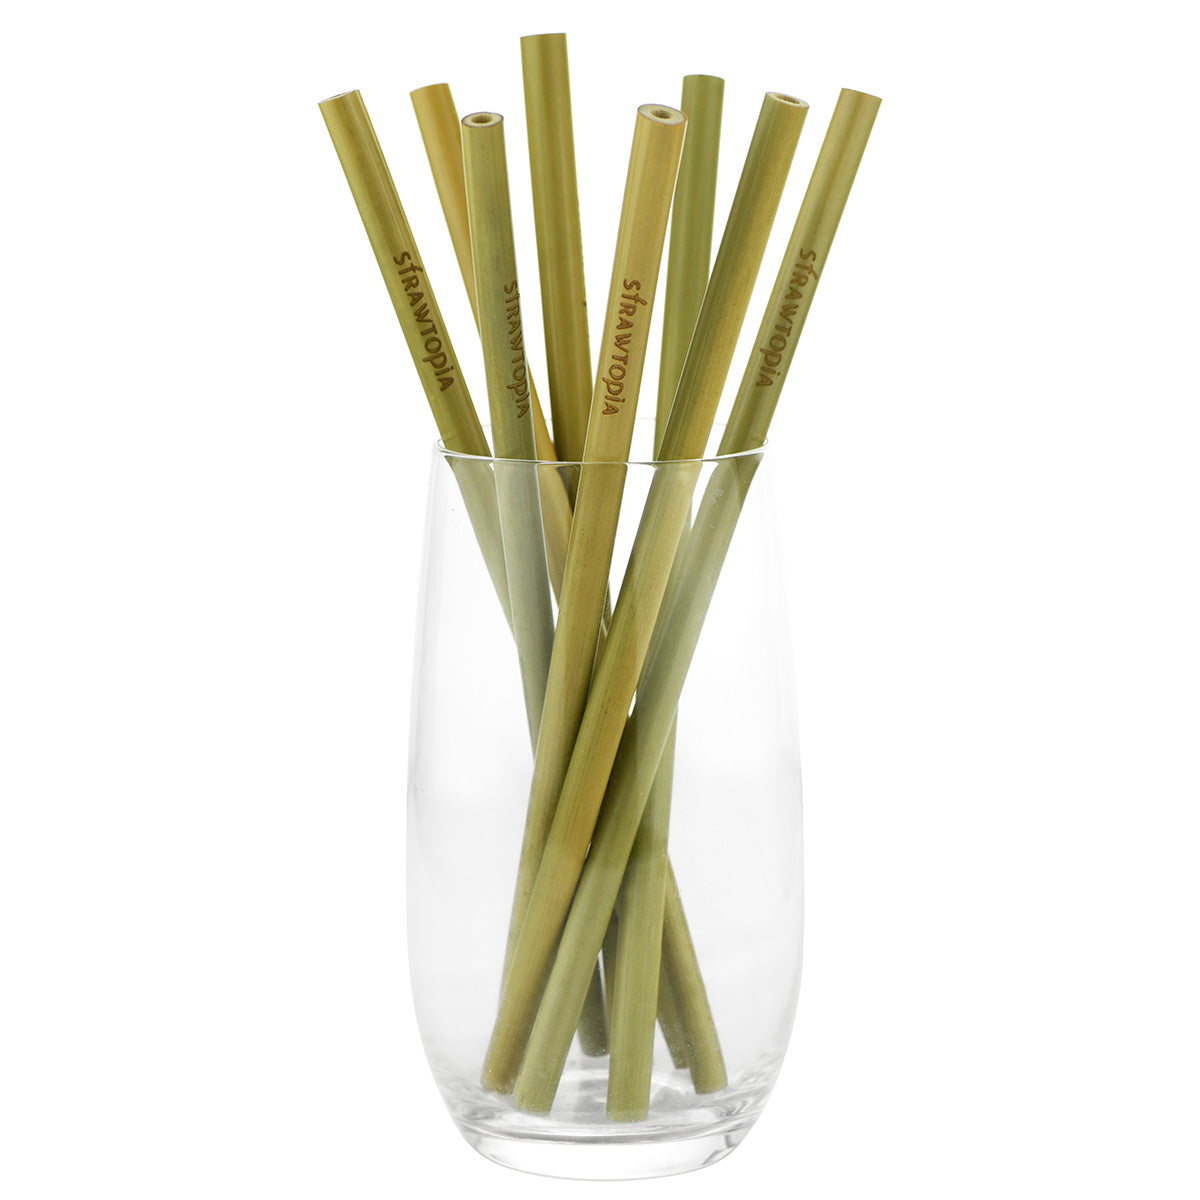 Best Reusable Straws: From Bamboo to the straw - Organic Straw